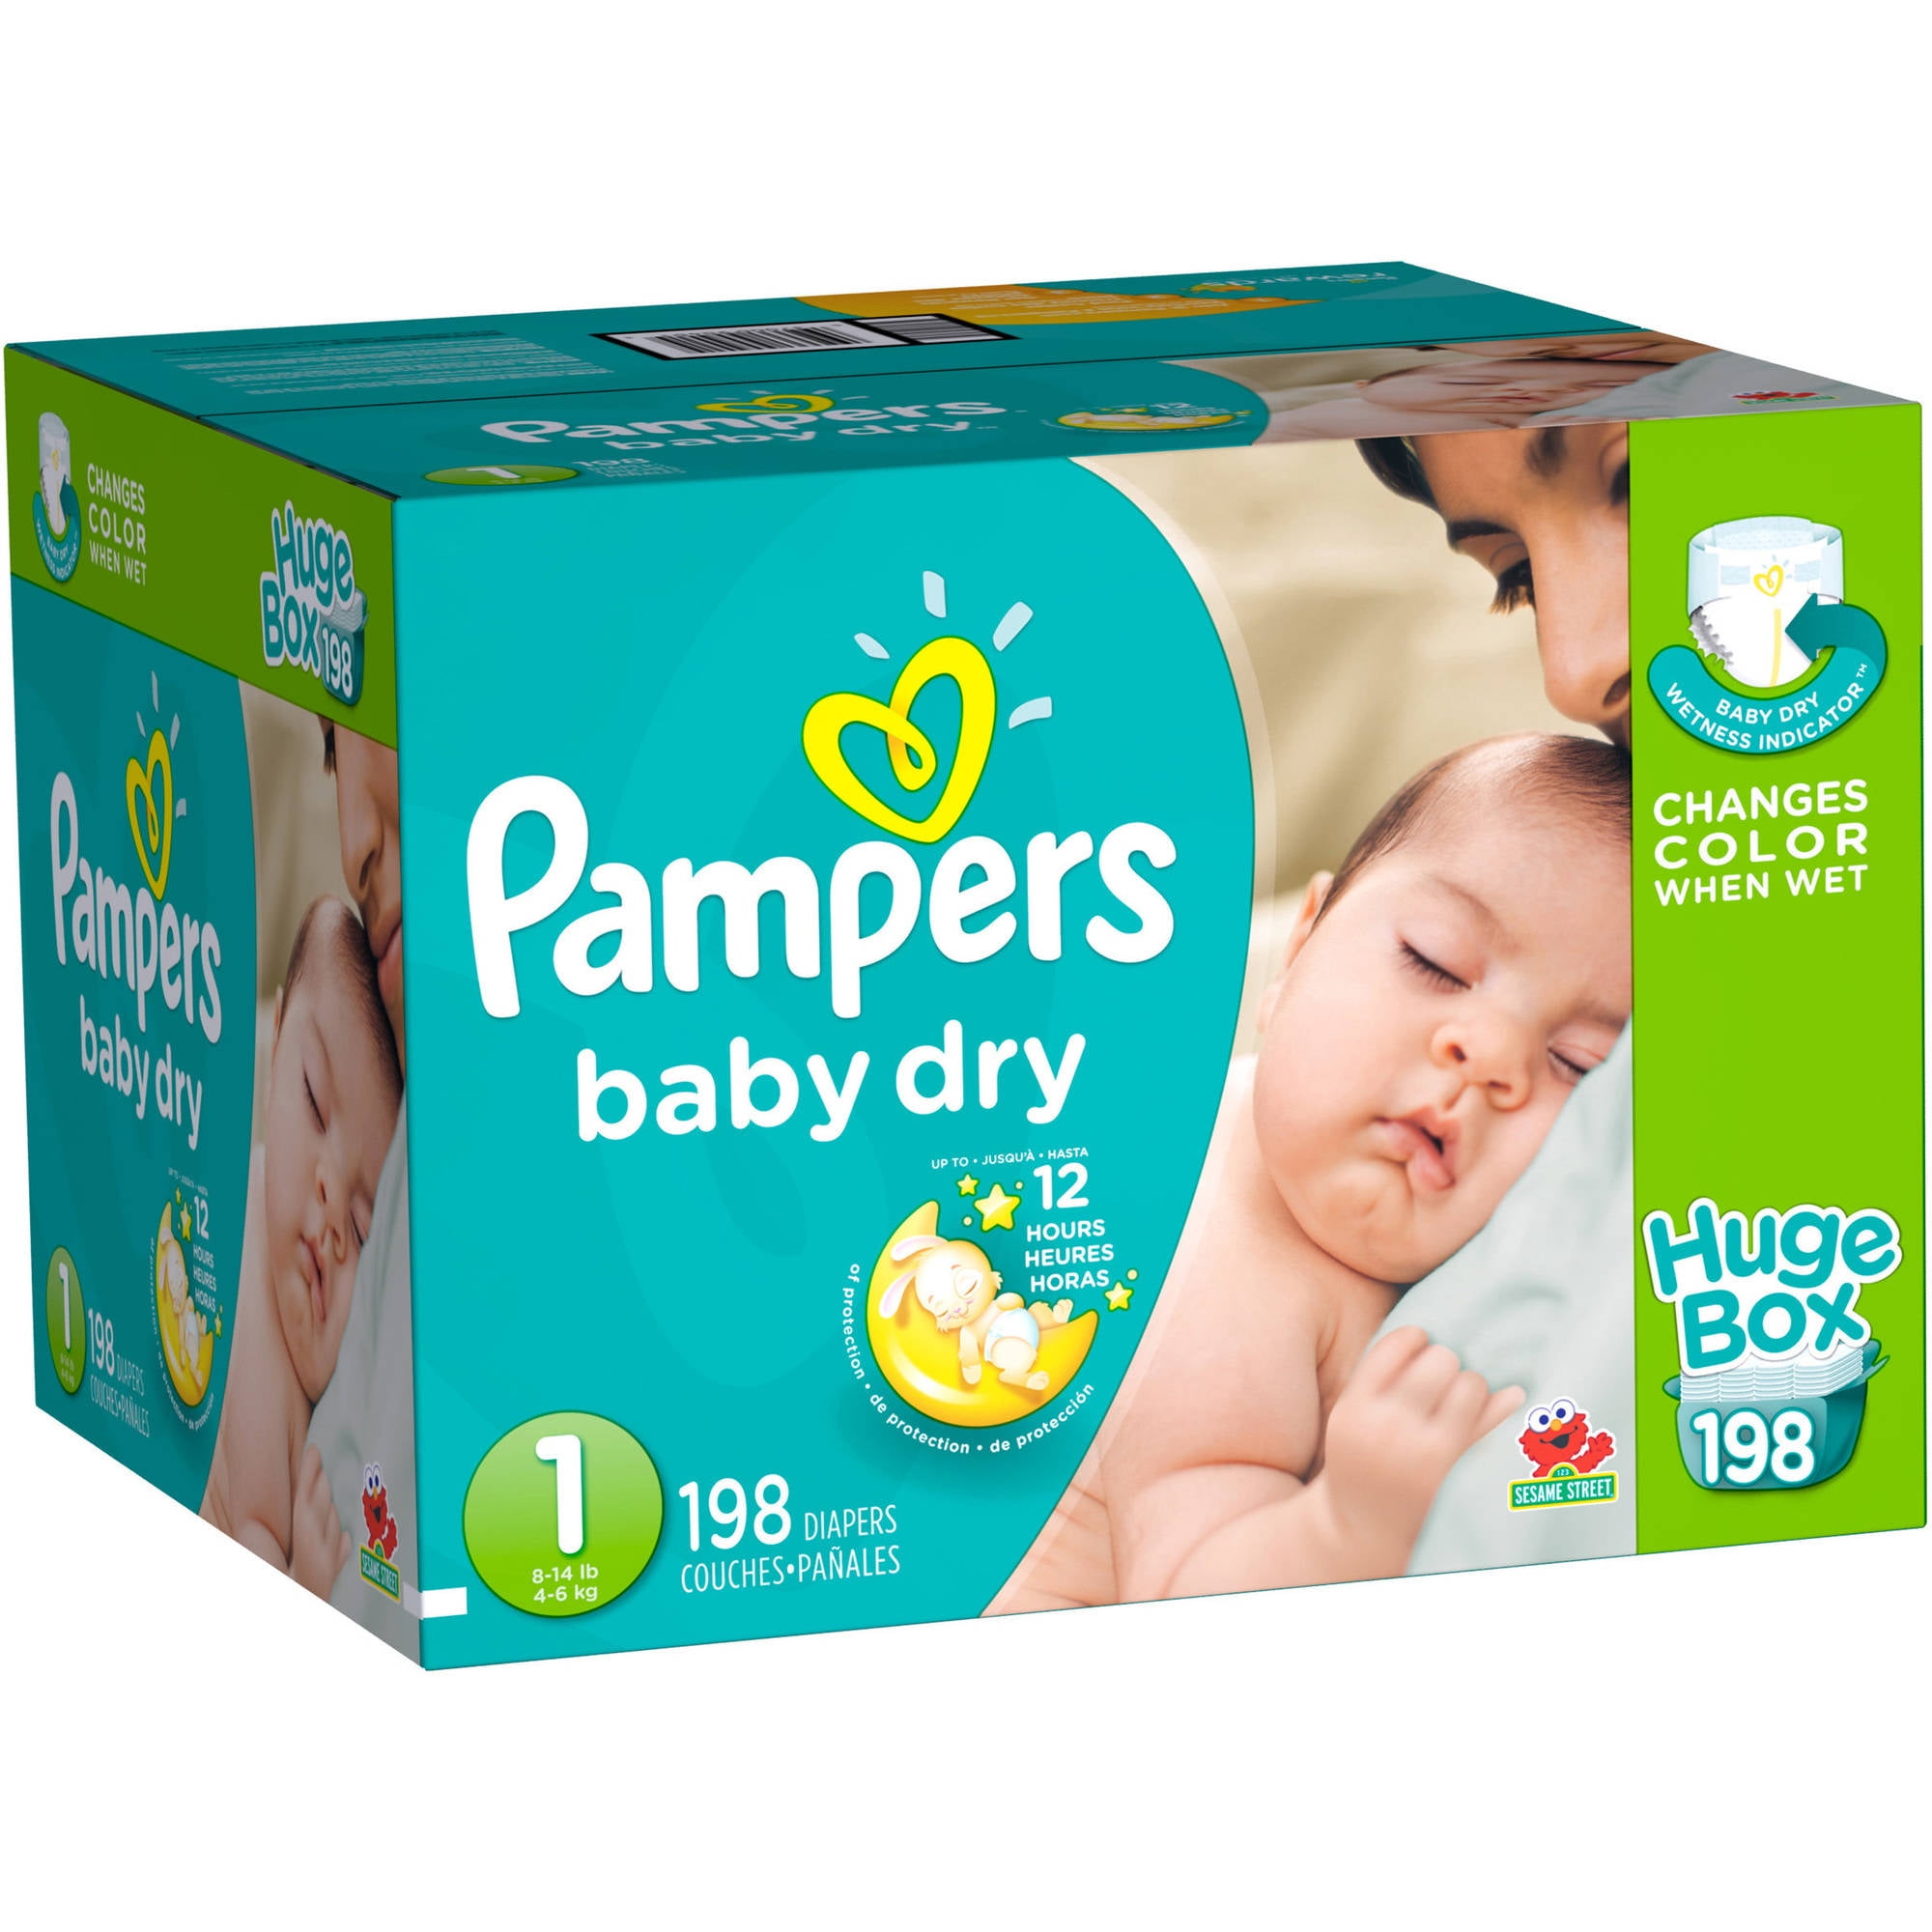 Baby Dry Diapers, Huge Pack, Size 198 - Walmart.com